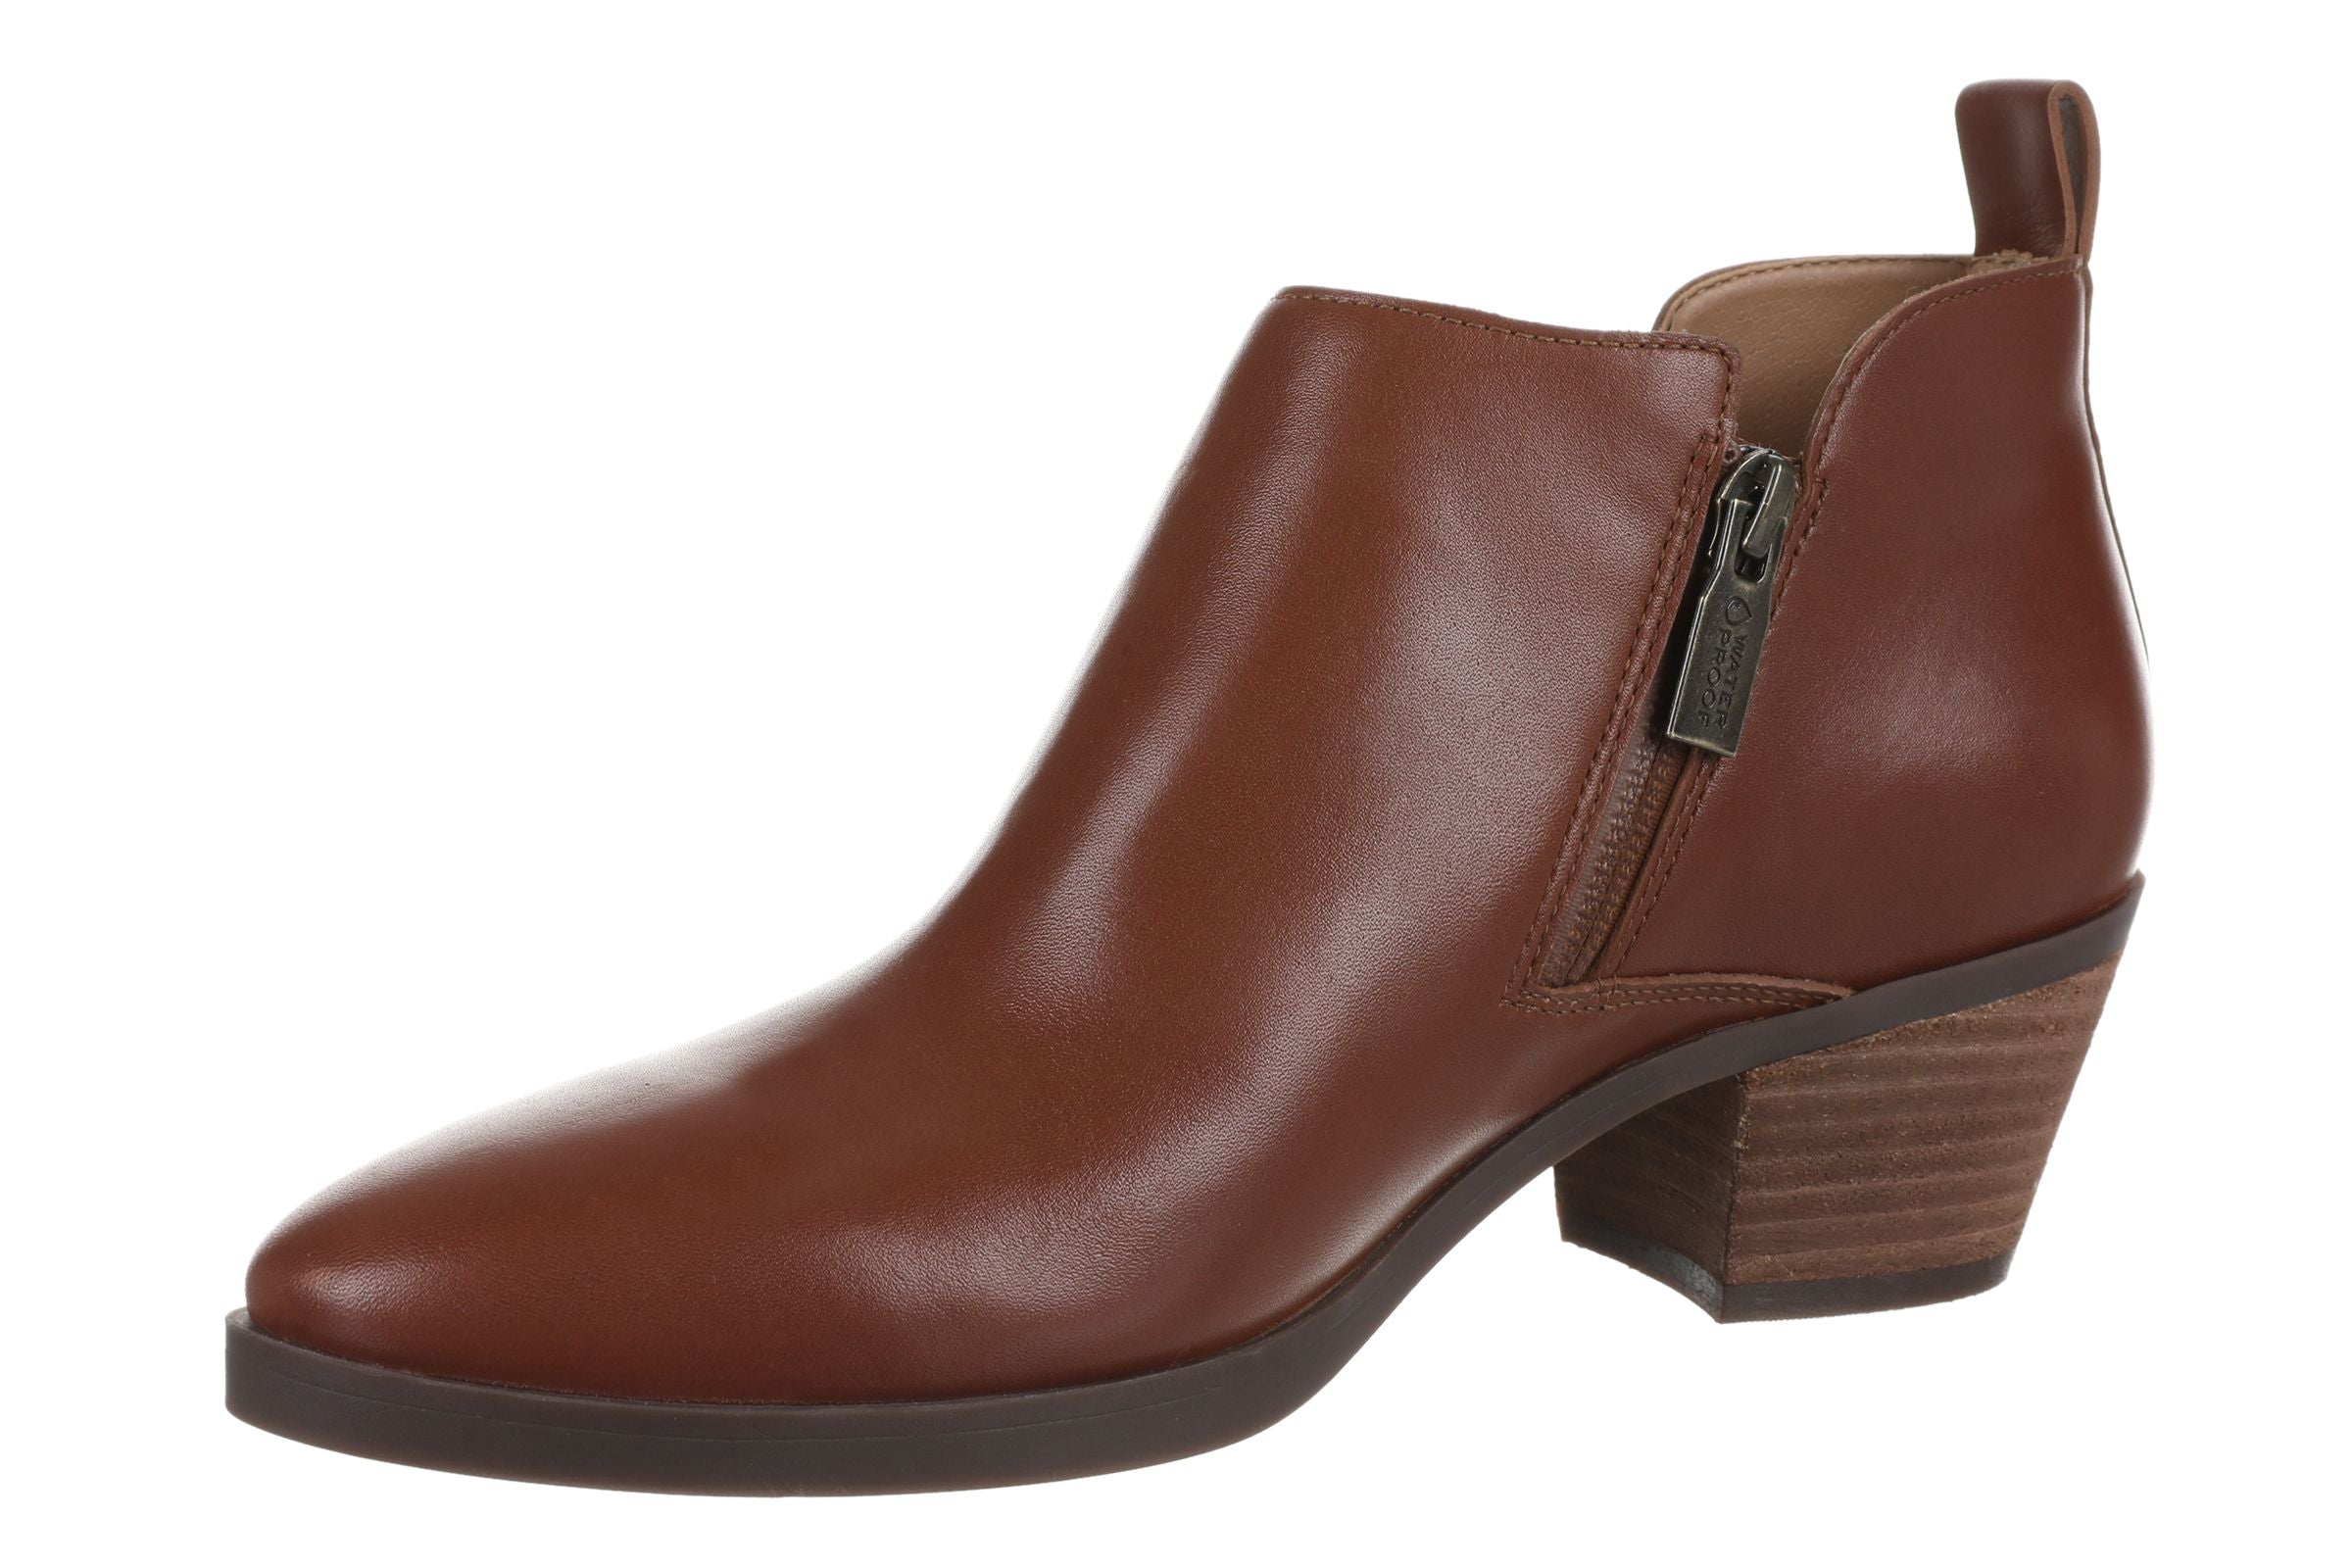 Women's Vionic Cecily Ankle Boot